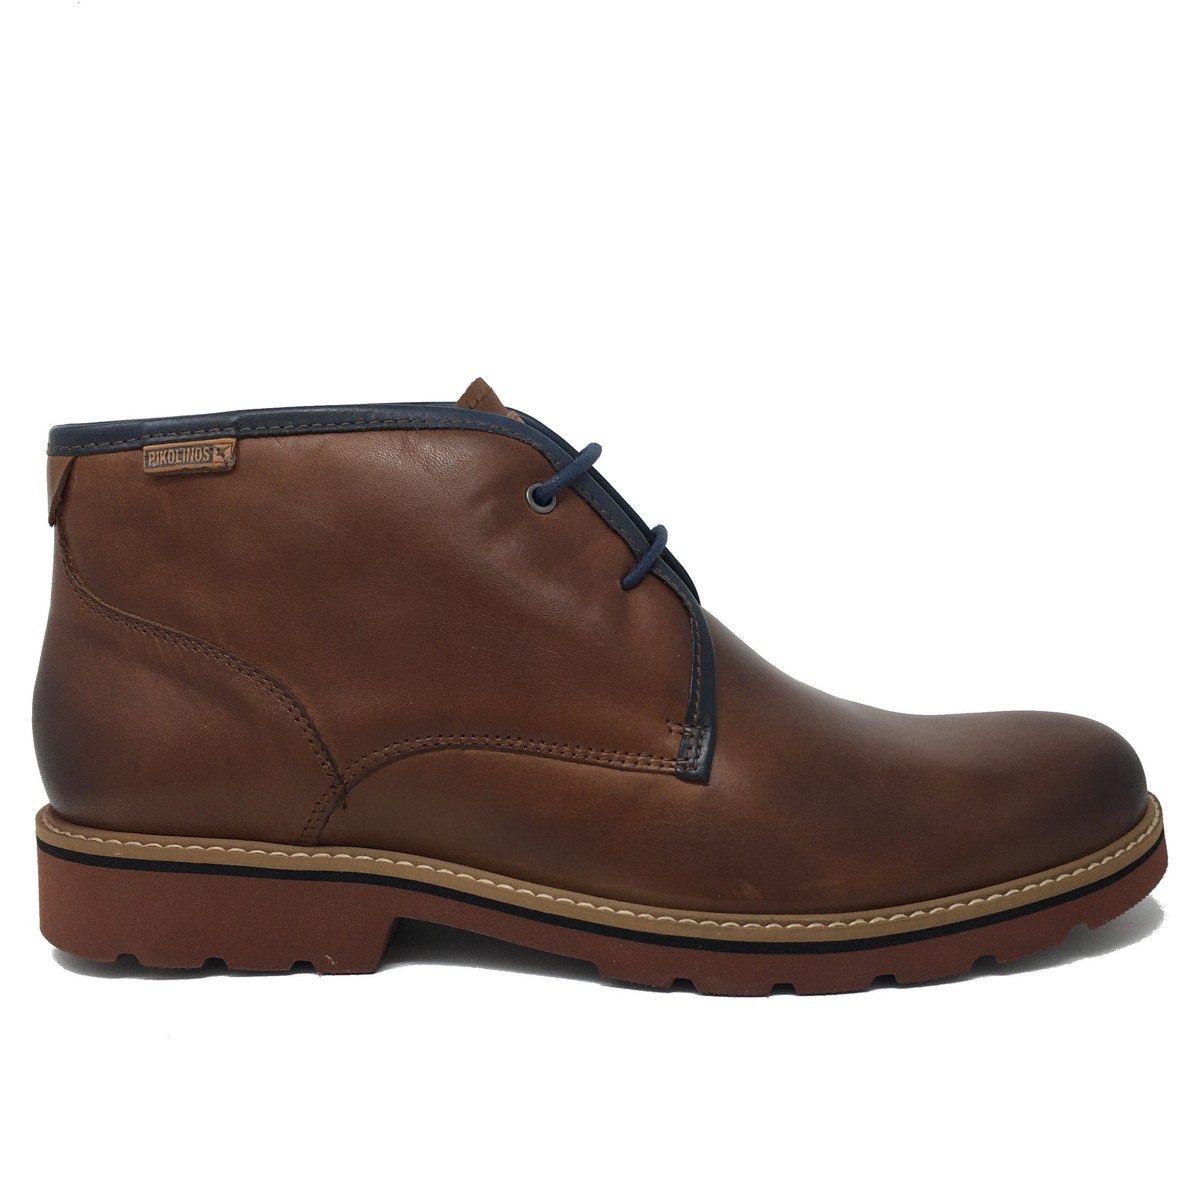 Chaussures amp Boots Pikolinos CHAUSSURE  M6E-8320 Marron